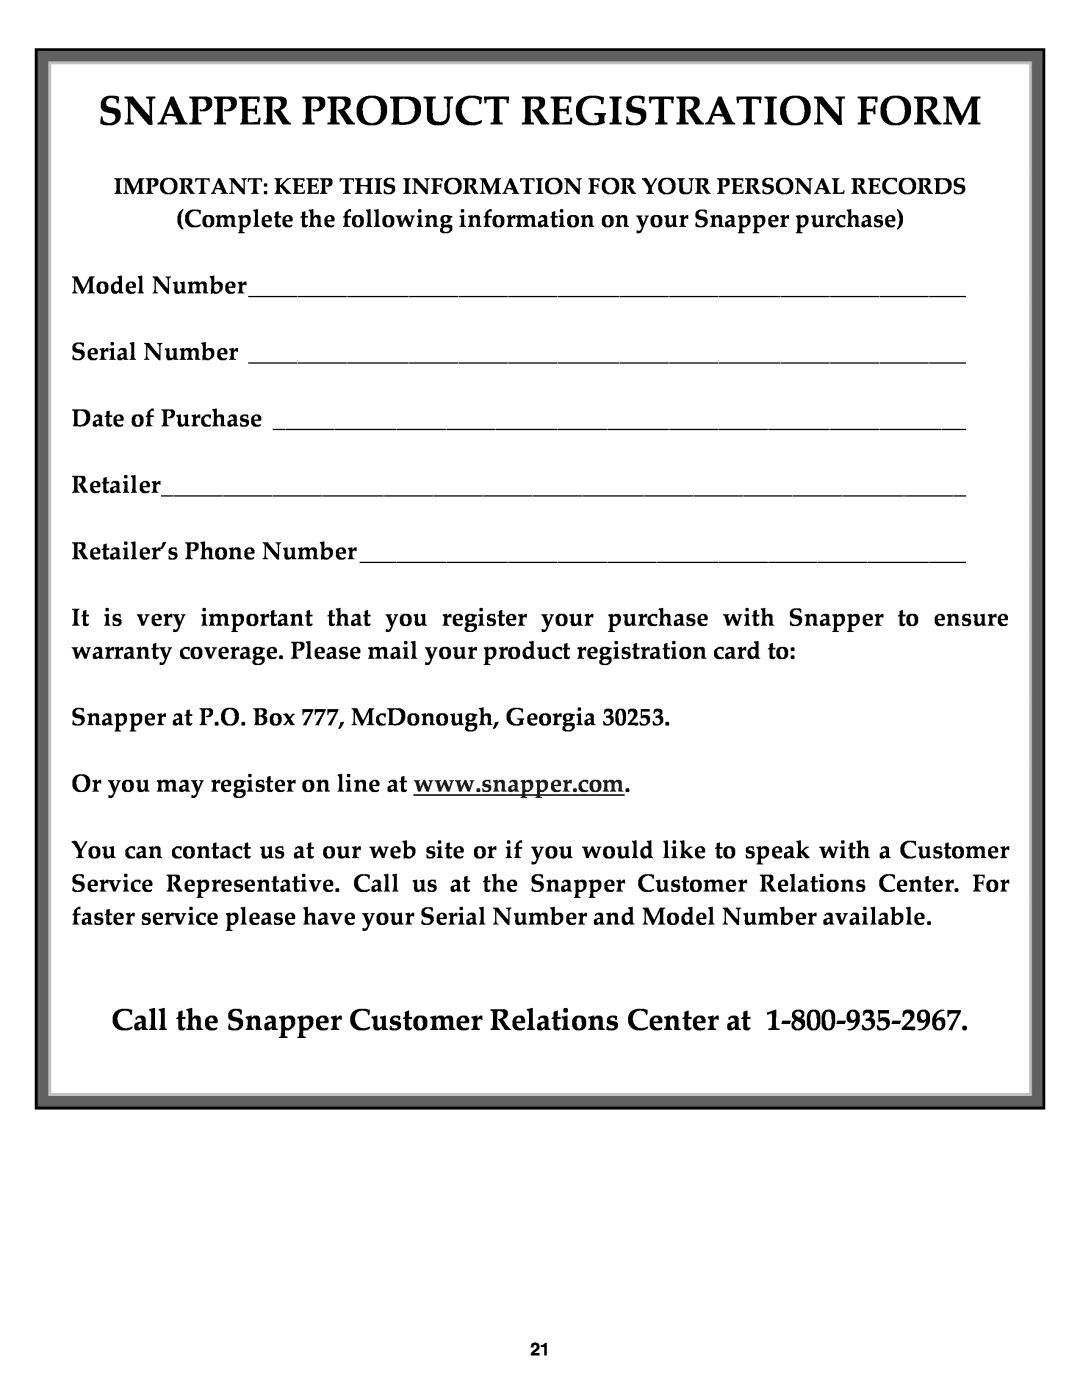 Snapper R1962519B Snapper Product Registration Form, Call the Snapper Customer Relations Center at 1‐800‐935‐2967 